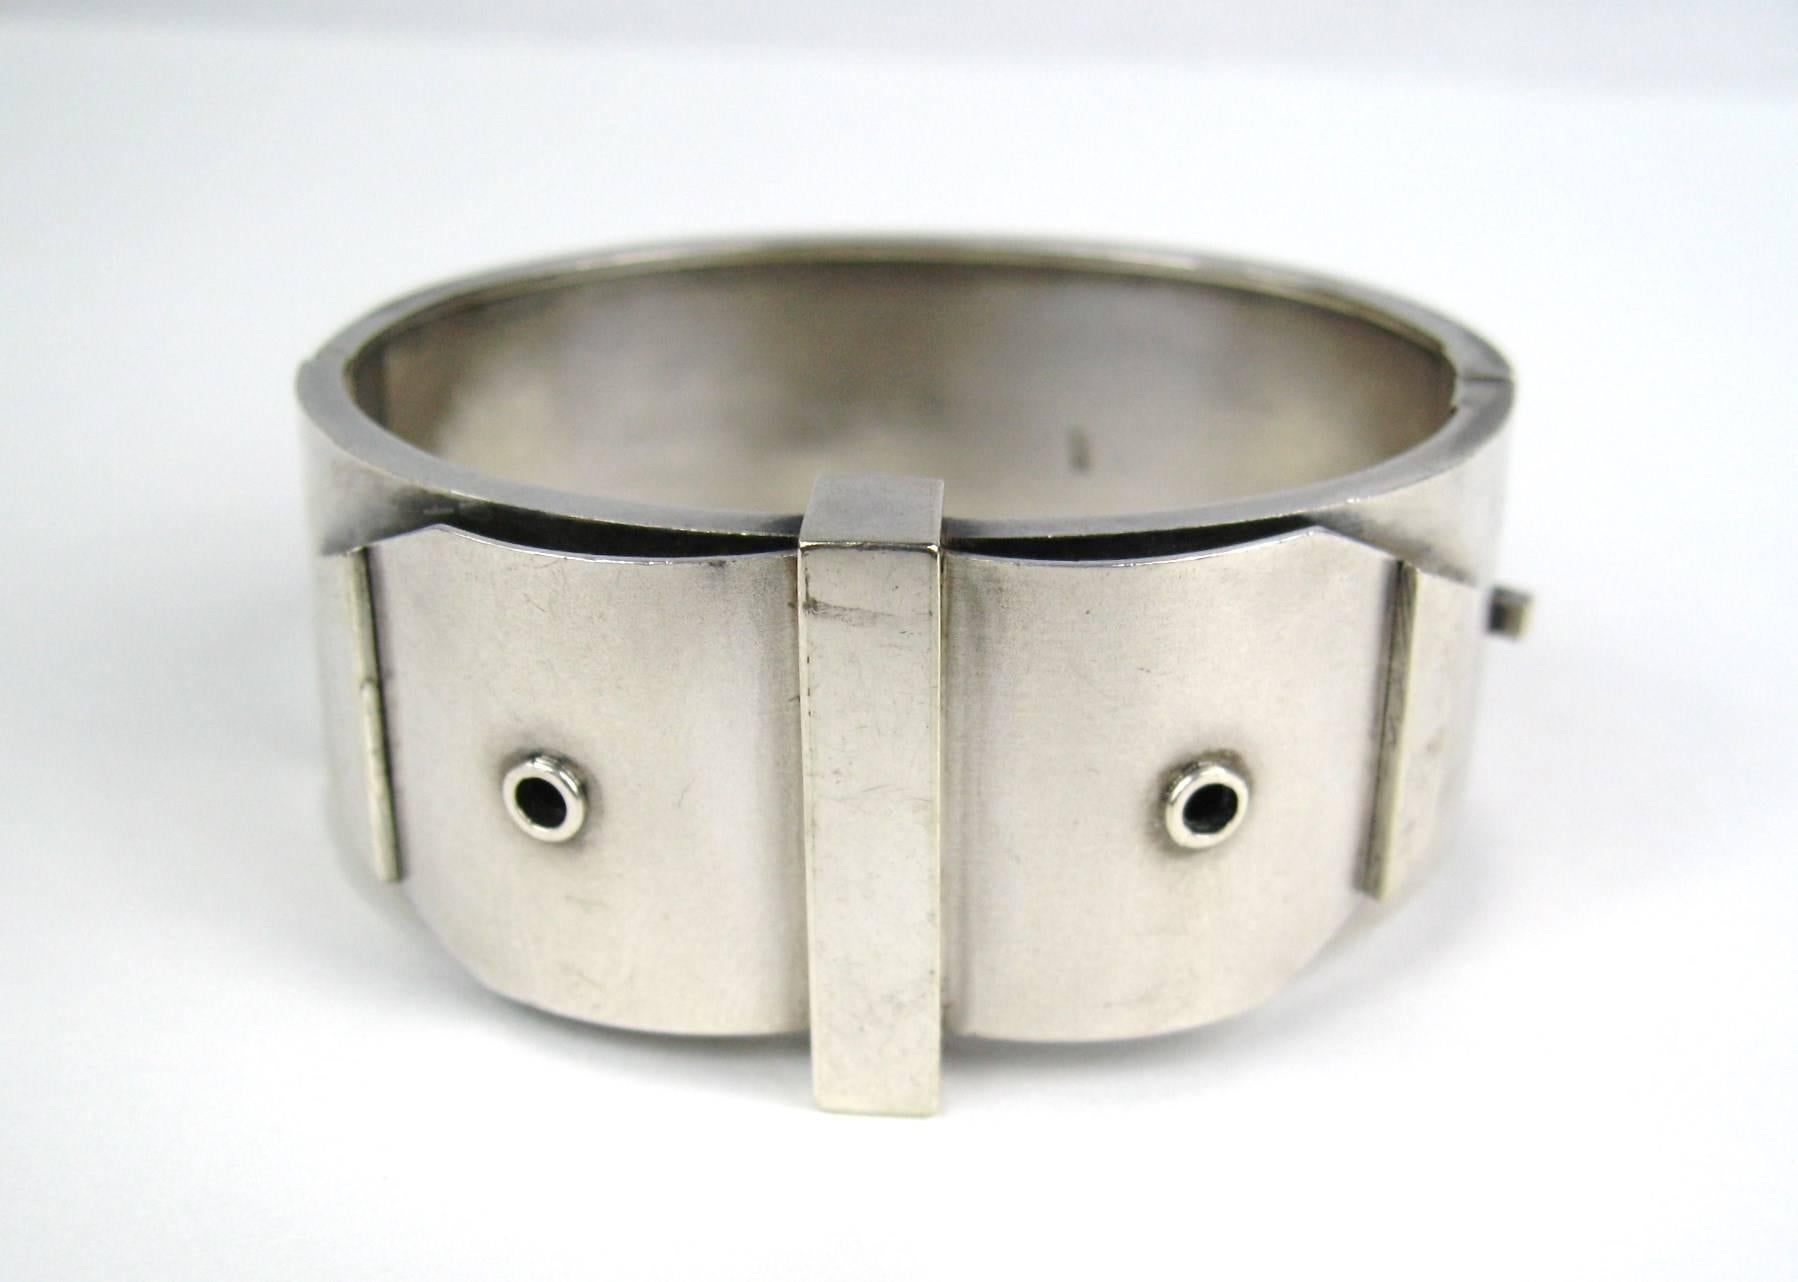 Stunning English sterling silver bracelet. Measures 1 inch wide. Will fit a 6.5  to 7.5 wrist. Slide-in clasp, as well as safety chain, still attached. Hallmarked inside the bracelet. This is out of a massive collection of Contemporary designer